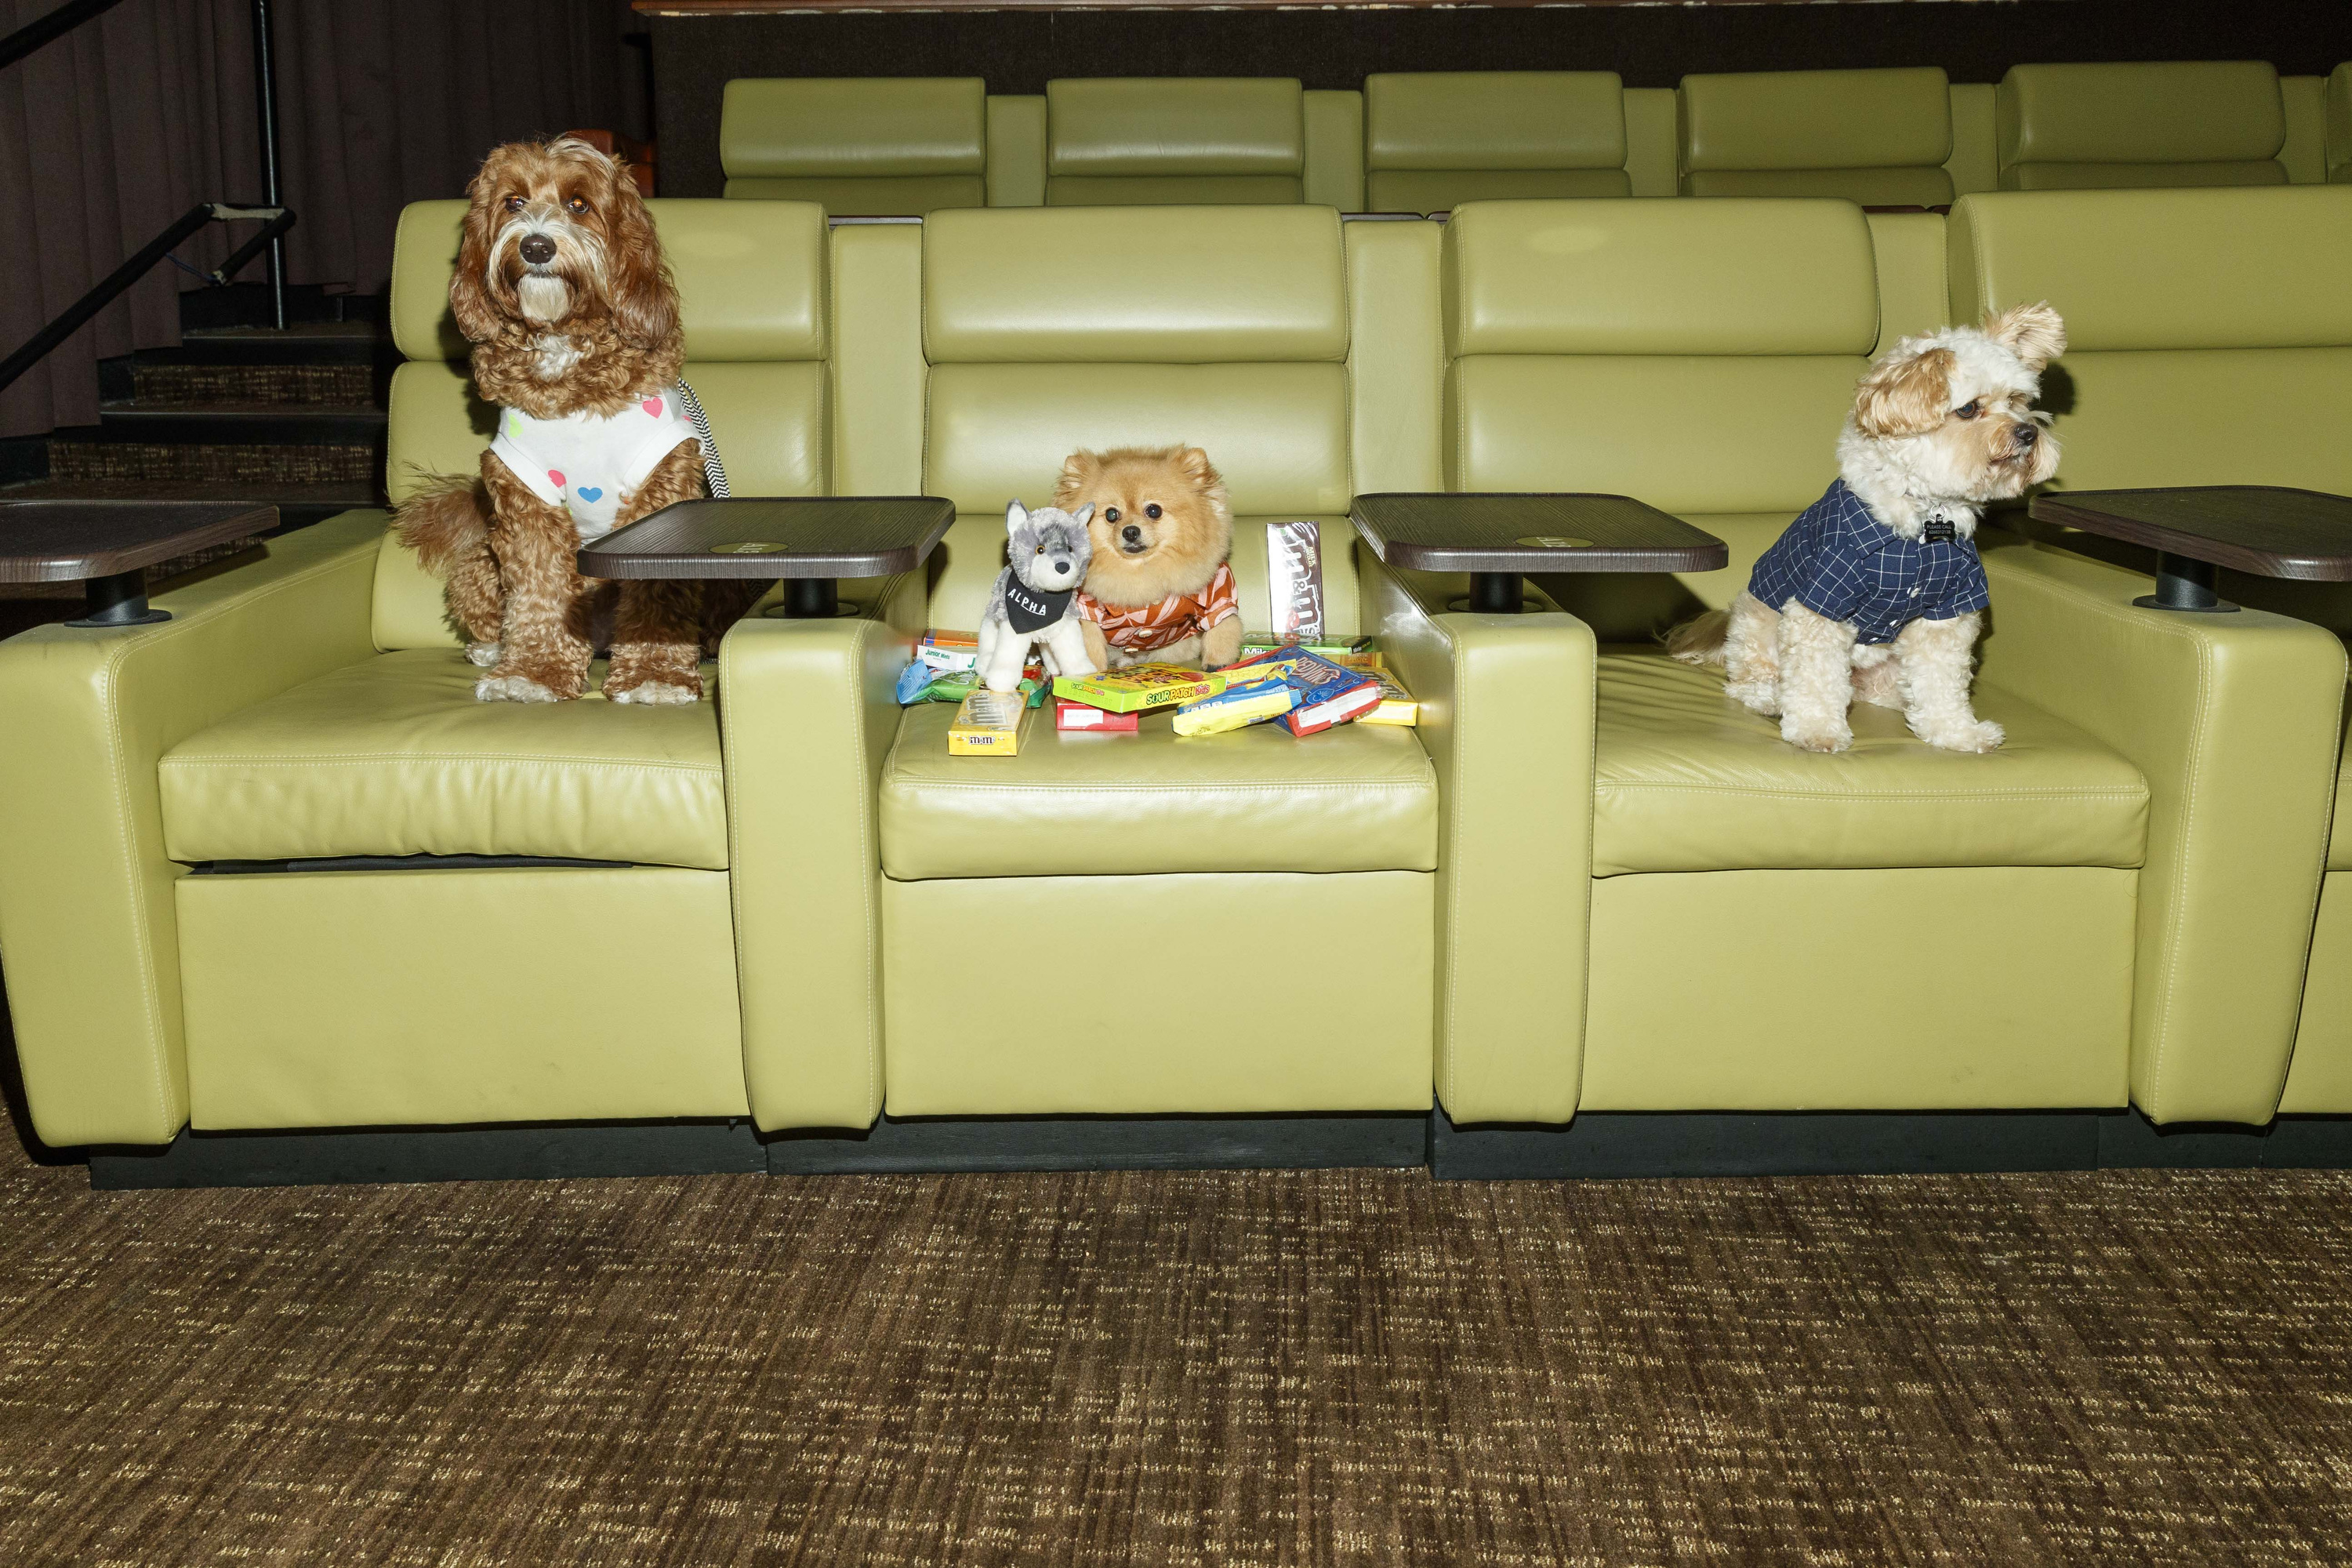 Alpha Bring Your Own Dog Special Screening (Sony Pictures)